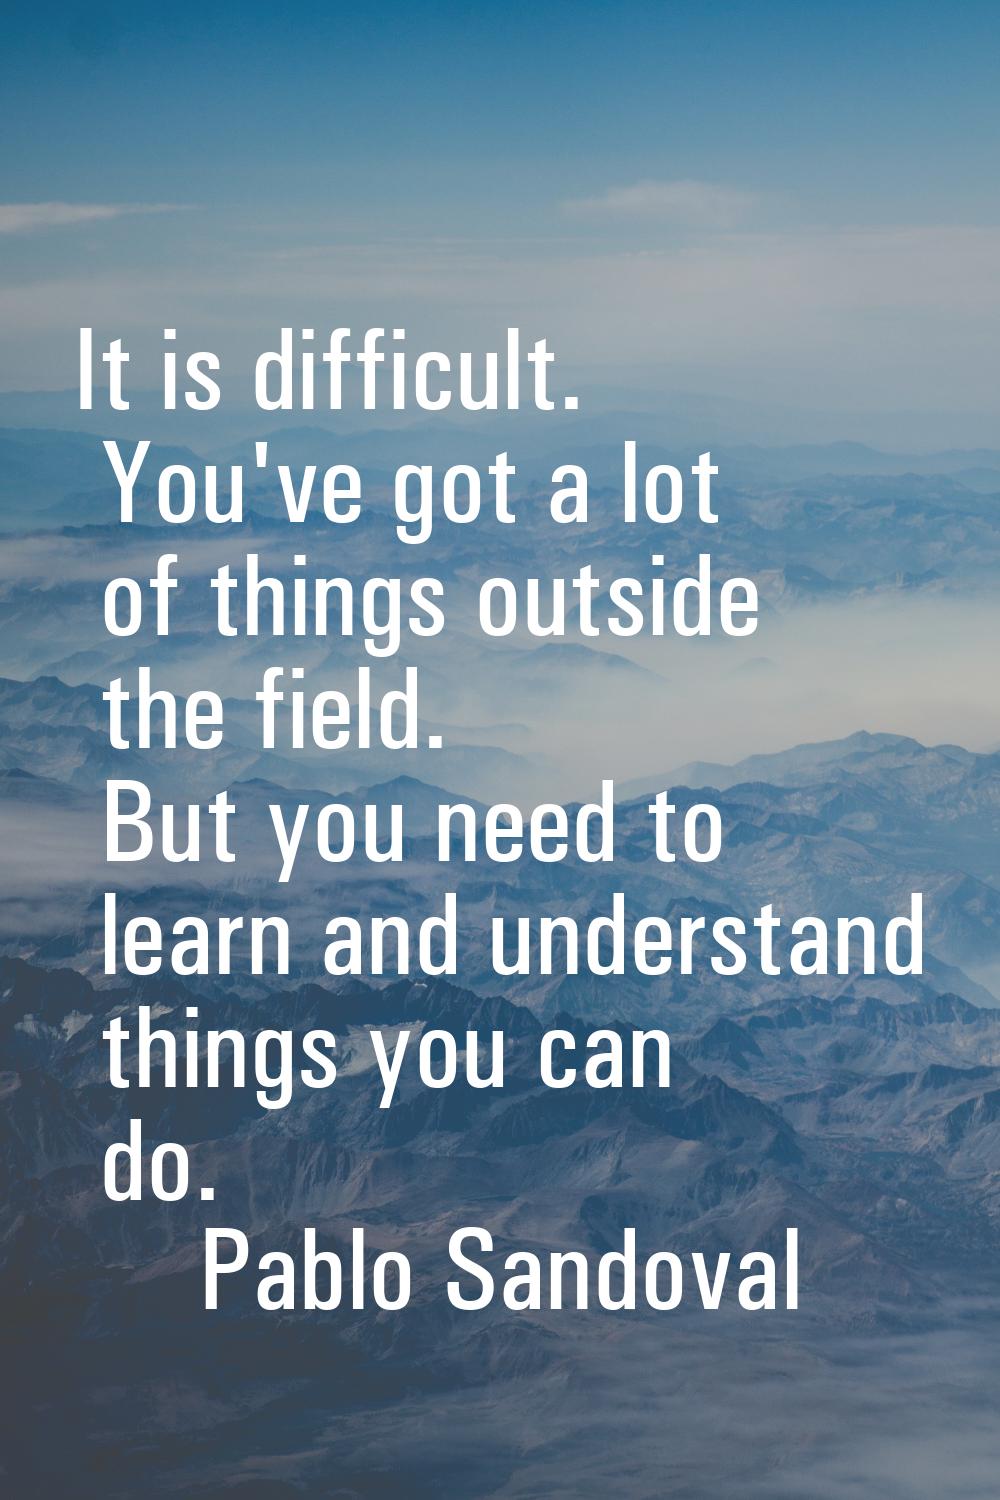 It is difficult. You've got a lot of things outside the field. But you need to learn and understand